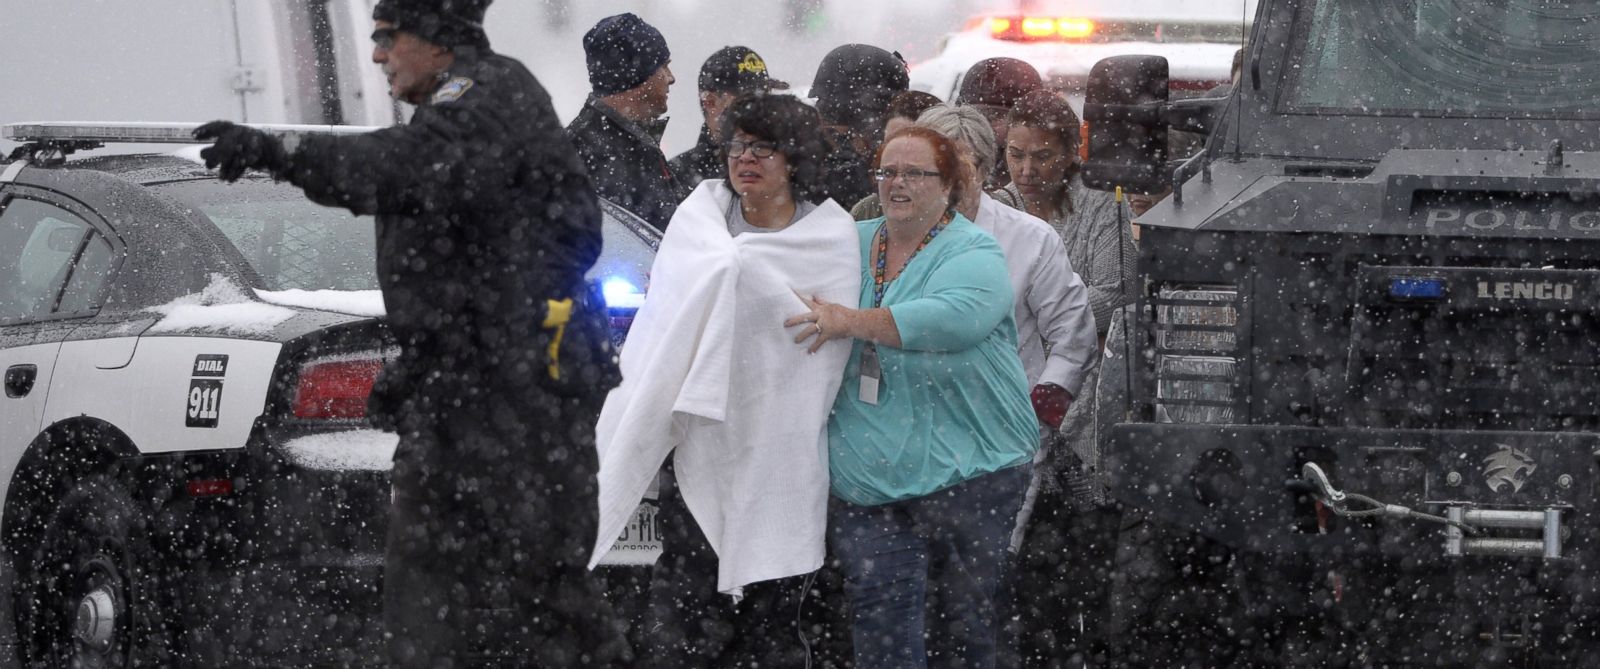 PHOTO: People are rescued near the scene of a shooting at the Planned Parenthood clinic in Colorado Springs, Colo., Nov. 27, 2015.